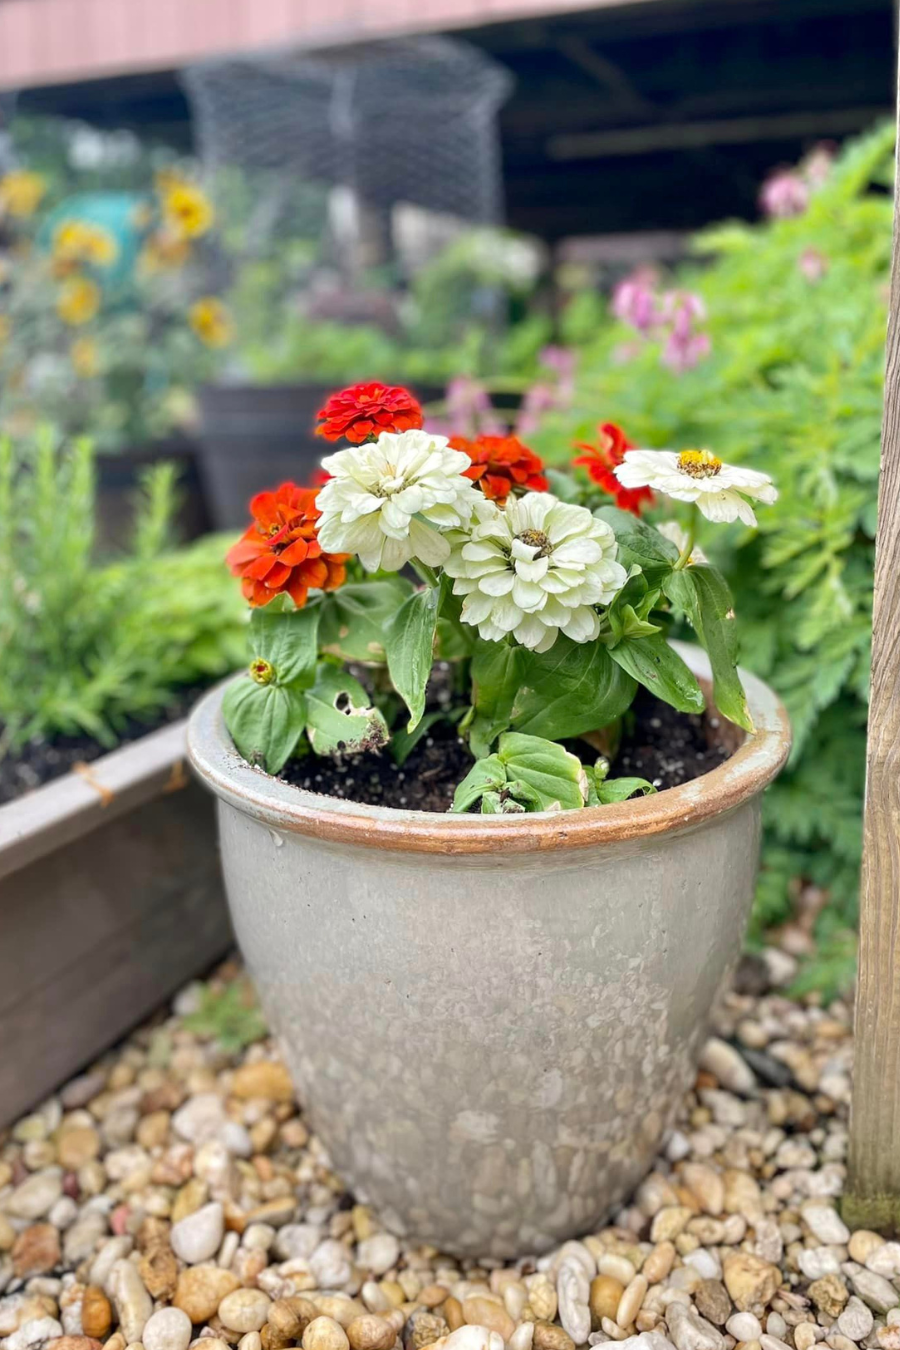 Photo of ceramic glazed pot filled with orange and white zinnias. Zinnias sit alongside herb planter with wild bleeding hearts, barrel planter, and yellow flowers in background.